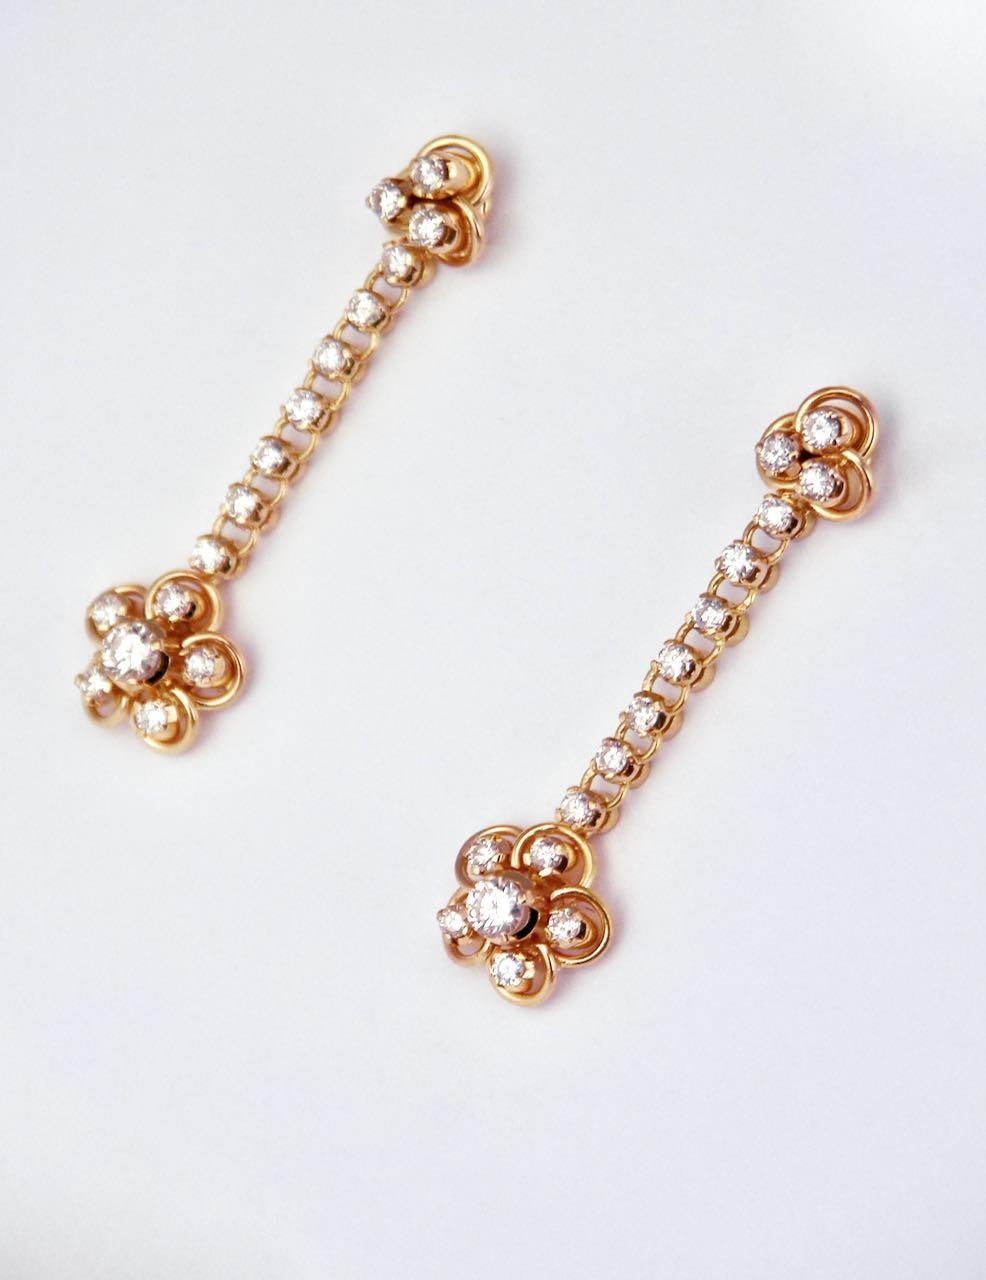 A pretty pair of 18k gold diamond drop earrings; each earring consisting of a delicate cluster design of six brilliant cut diamonds arranged in a flower type motif suspended on an articulated chain set with seven diamonds and below a trefoil shape